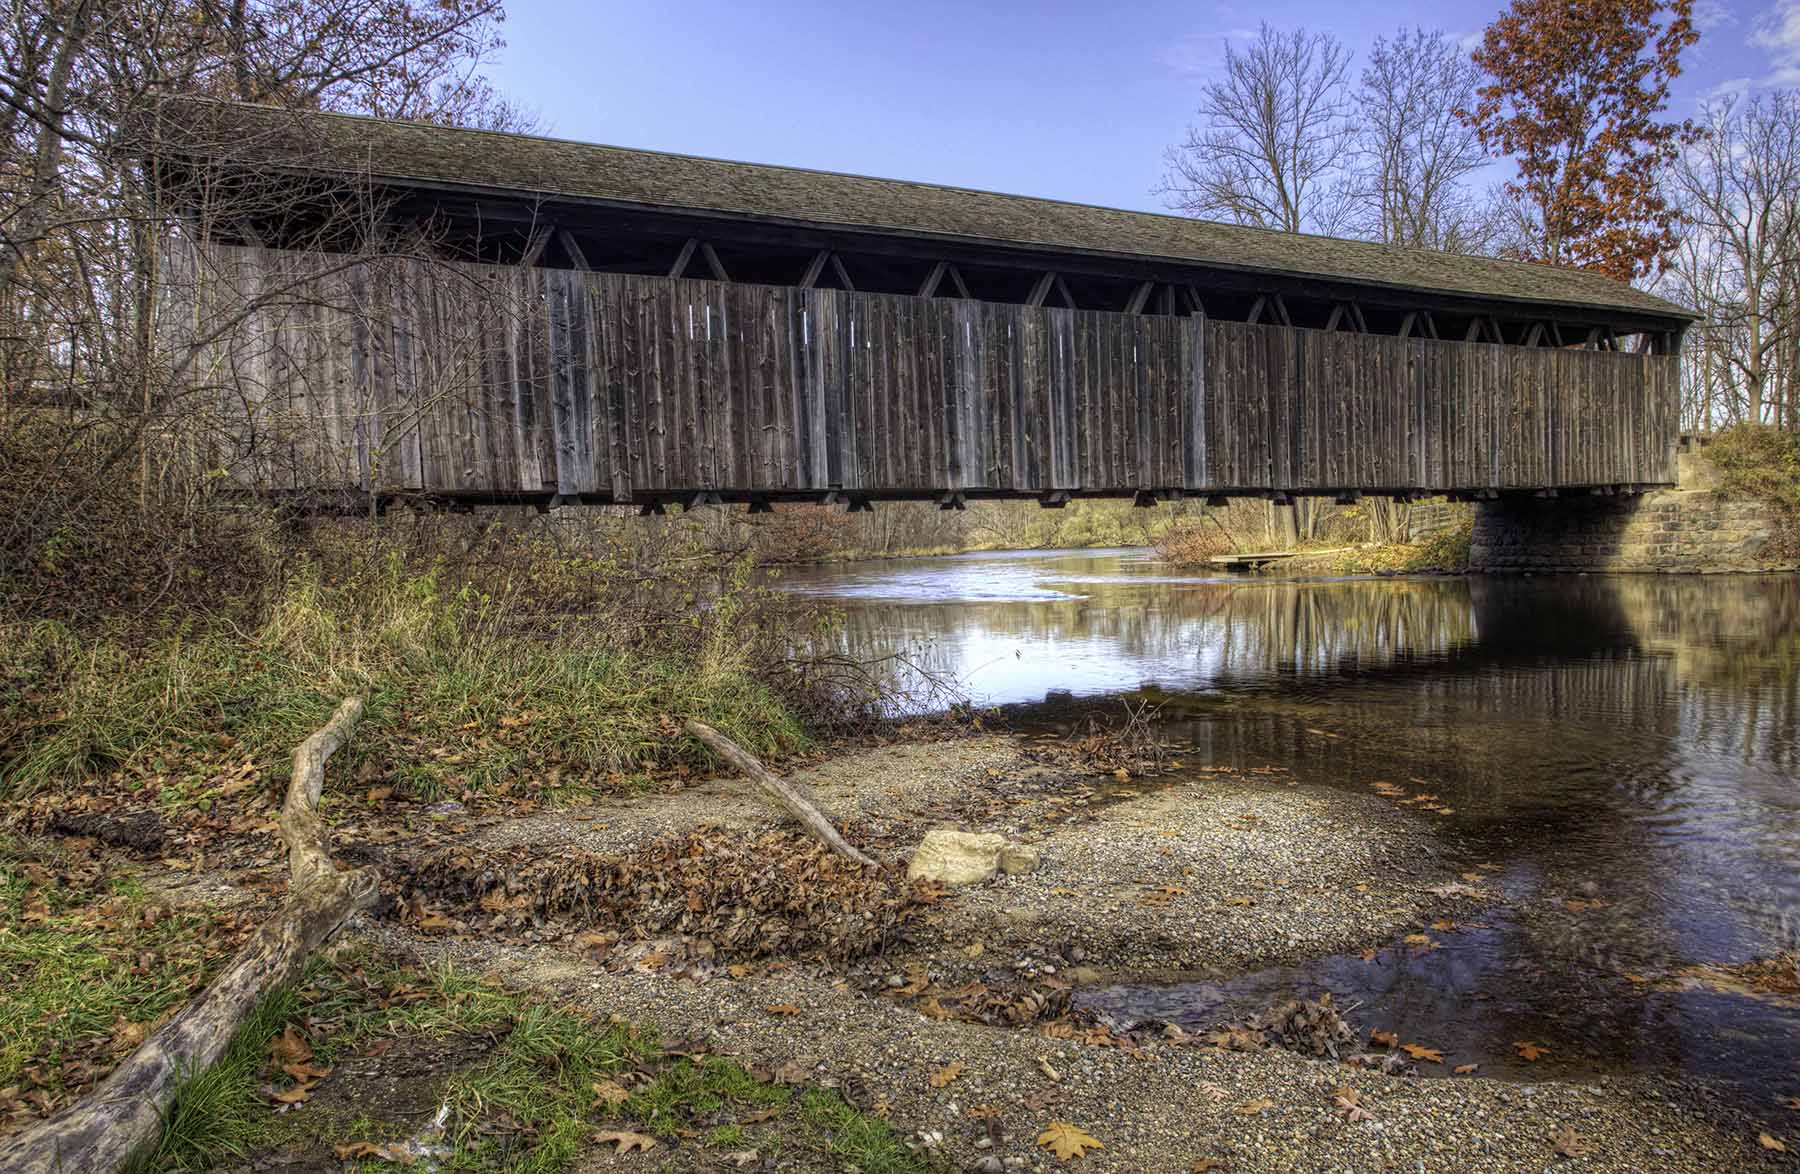 one lane wooden bridge built in 1869 spanning a small body of water. it has a gabled roof and wood siding